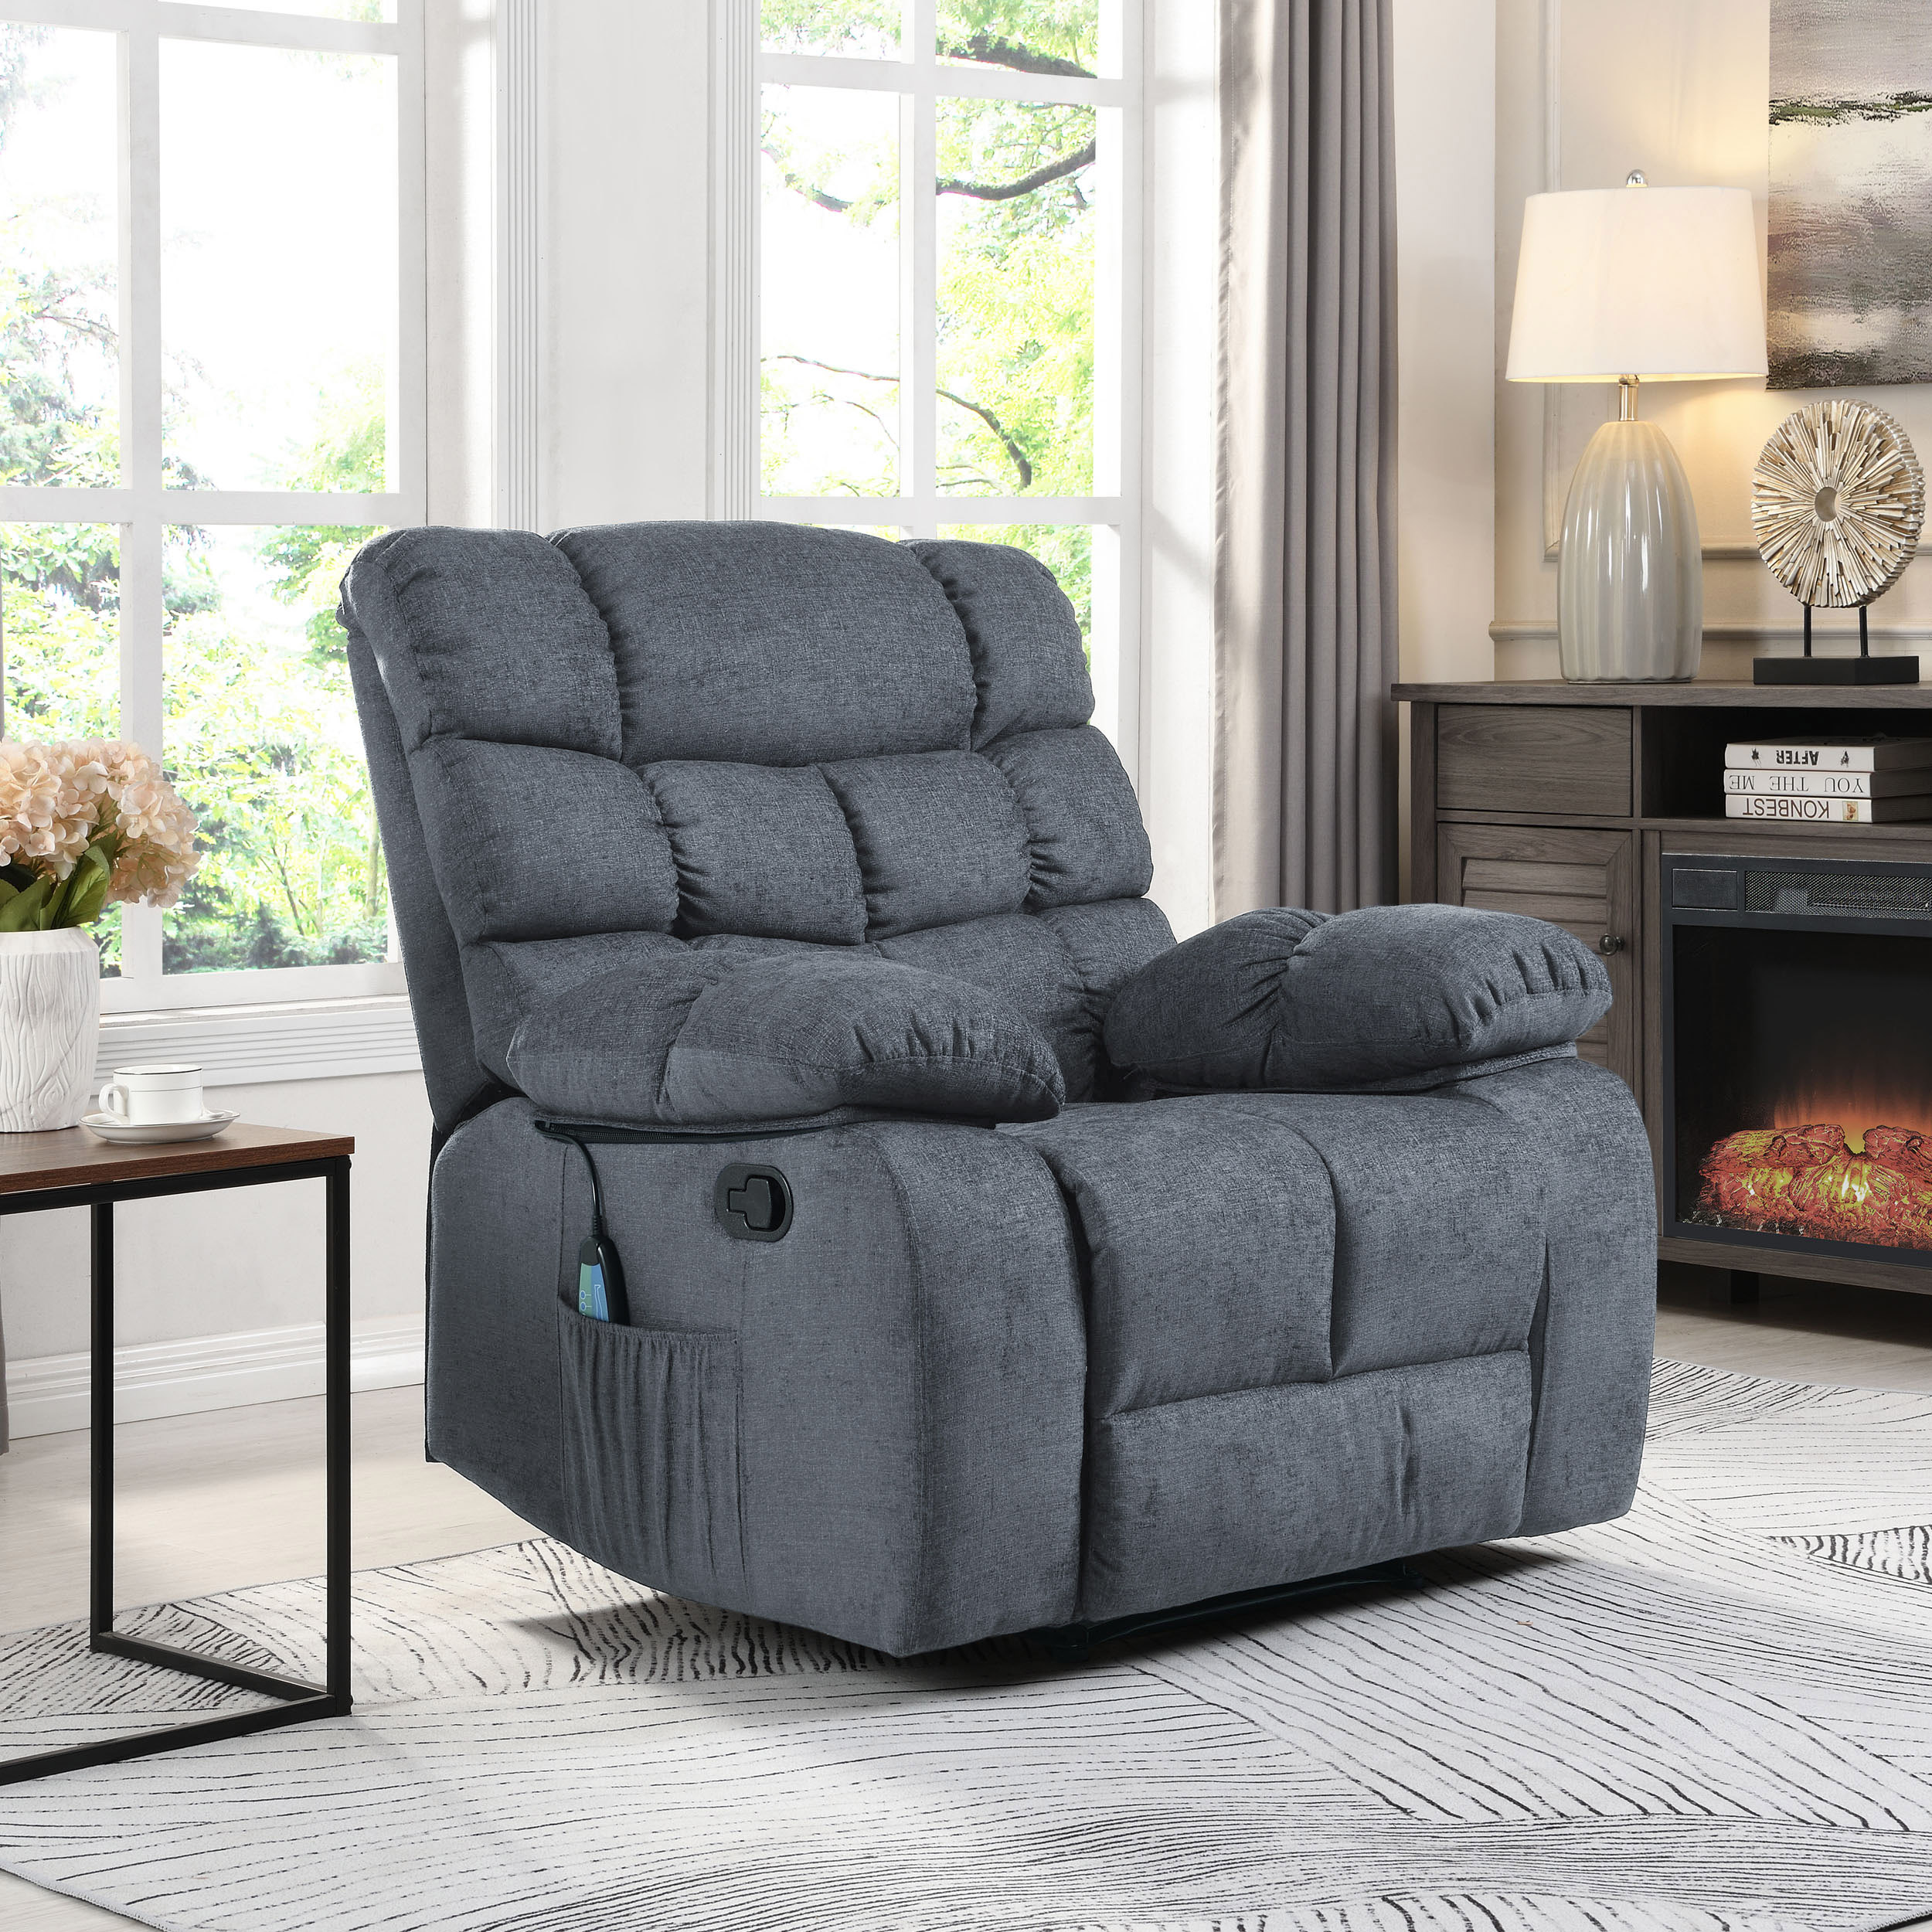 GDF Studio Conyers Contemporary Fabric Pillow Tufted Massage Recliner, Charcoal - image 2 of 12